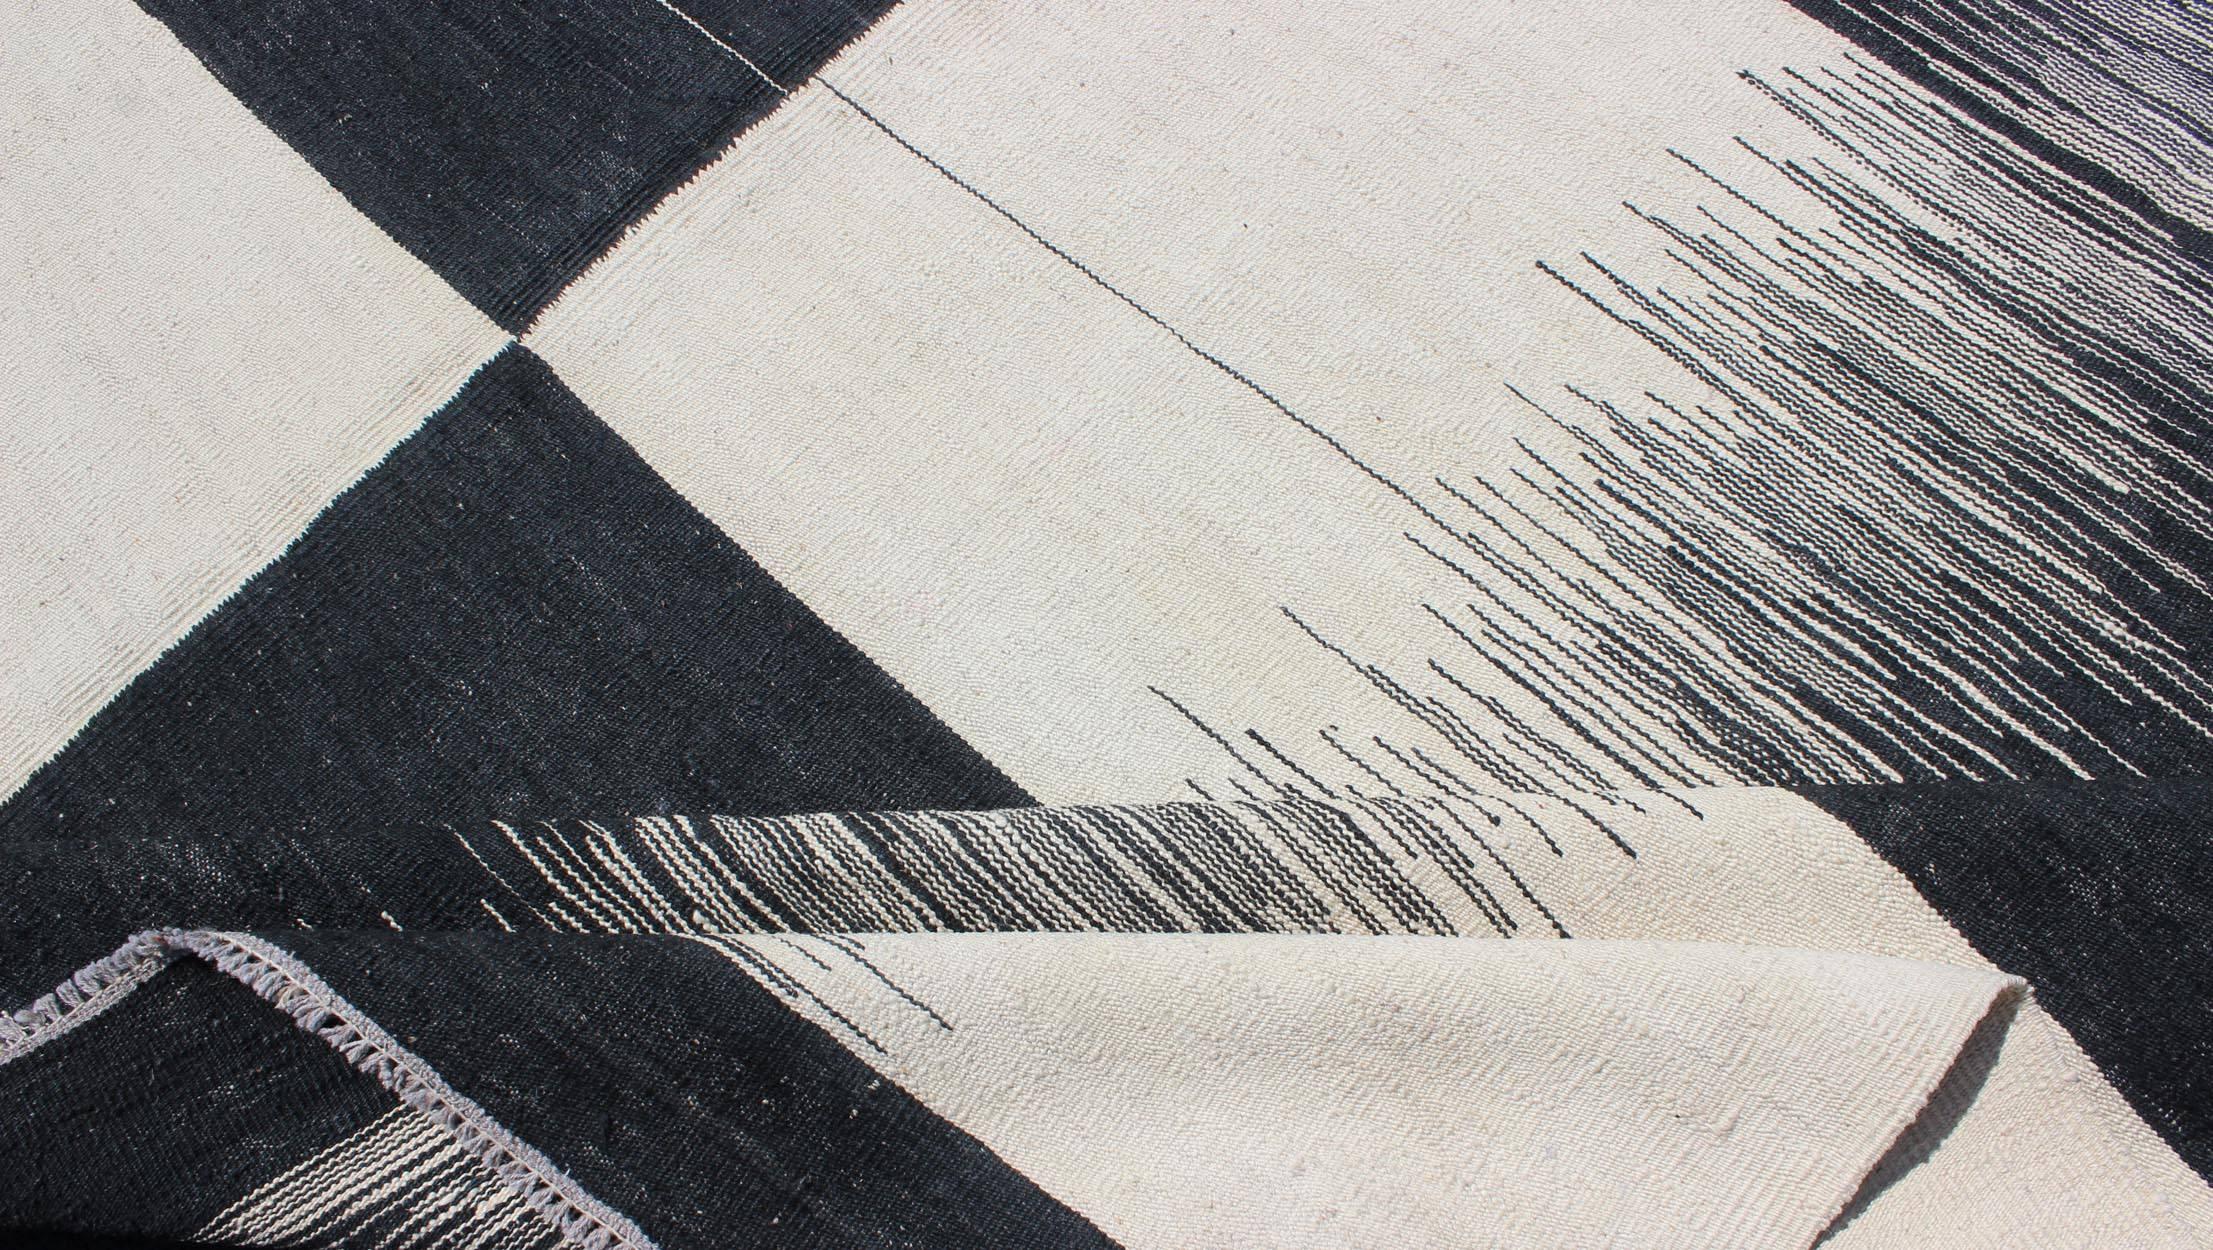 Modern Kilim Rug with Black, White, and Gray Large Block and Checkerboard Design 1